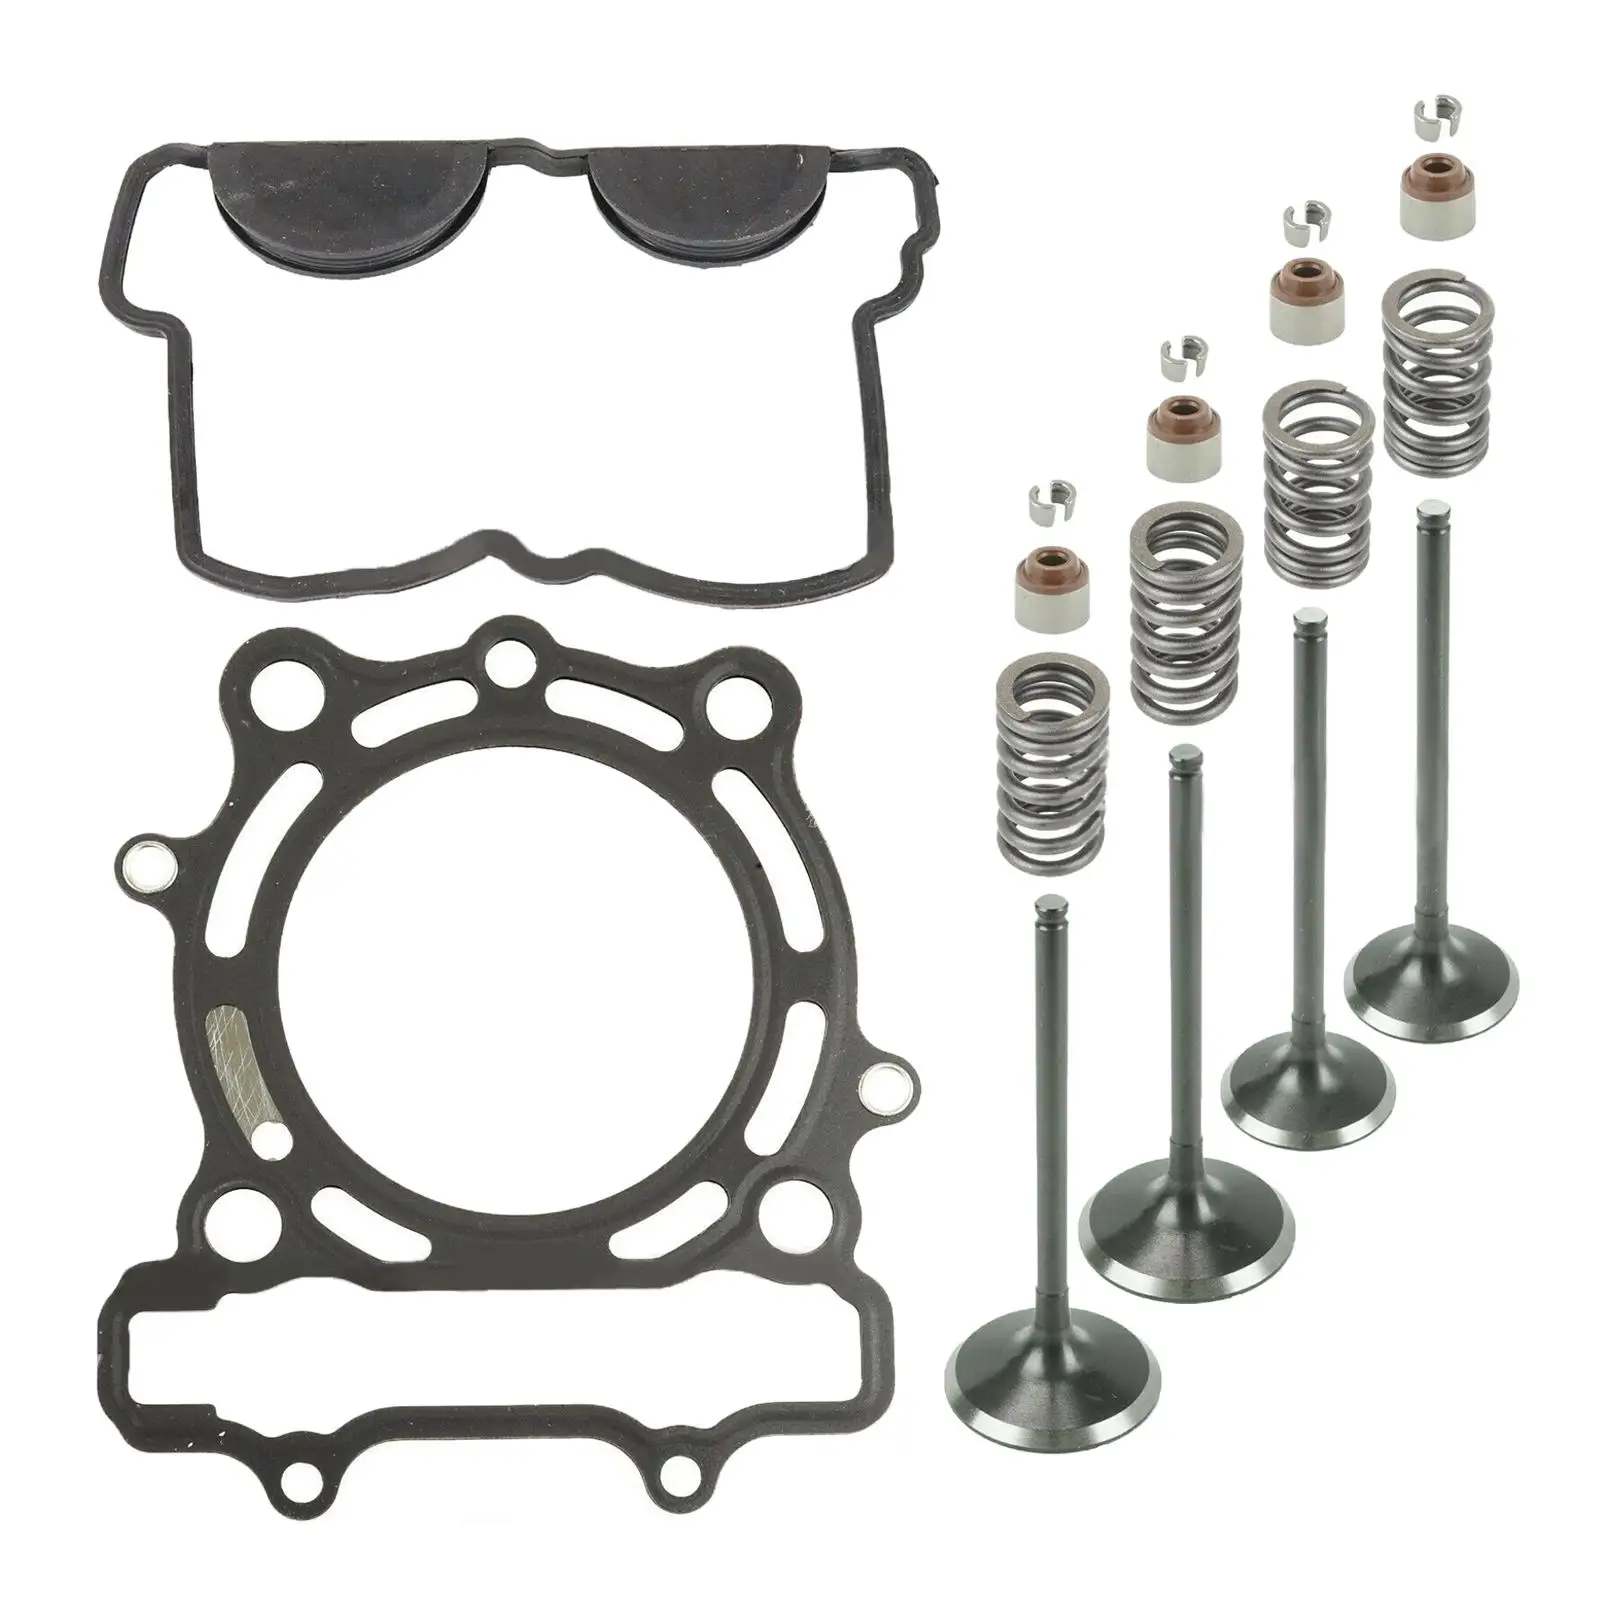 Motorcycle Cylinder Intake Exhaust Gasket Valve Kit Accessories Engine Parts Fit for Kawasaki KX250F Kxf250 KX 250F 09-16